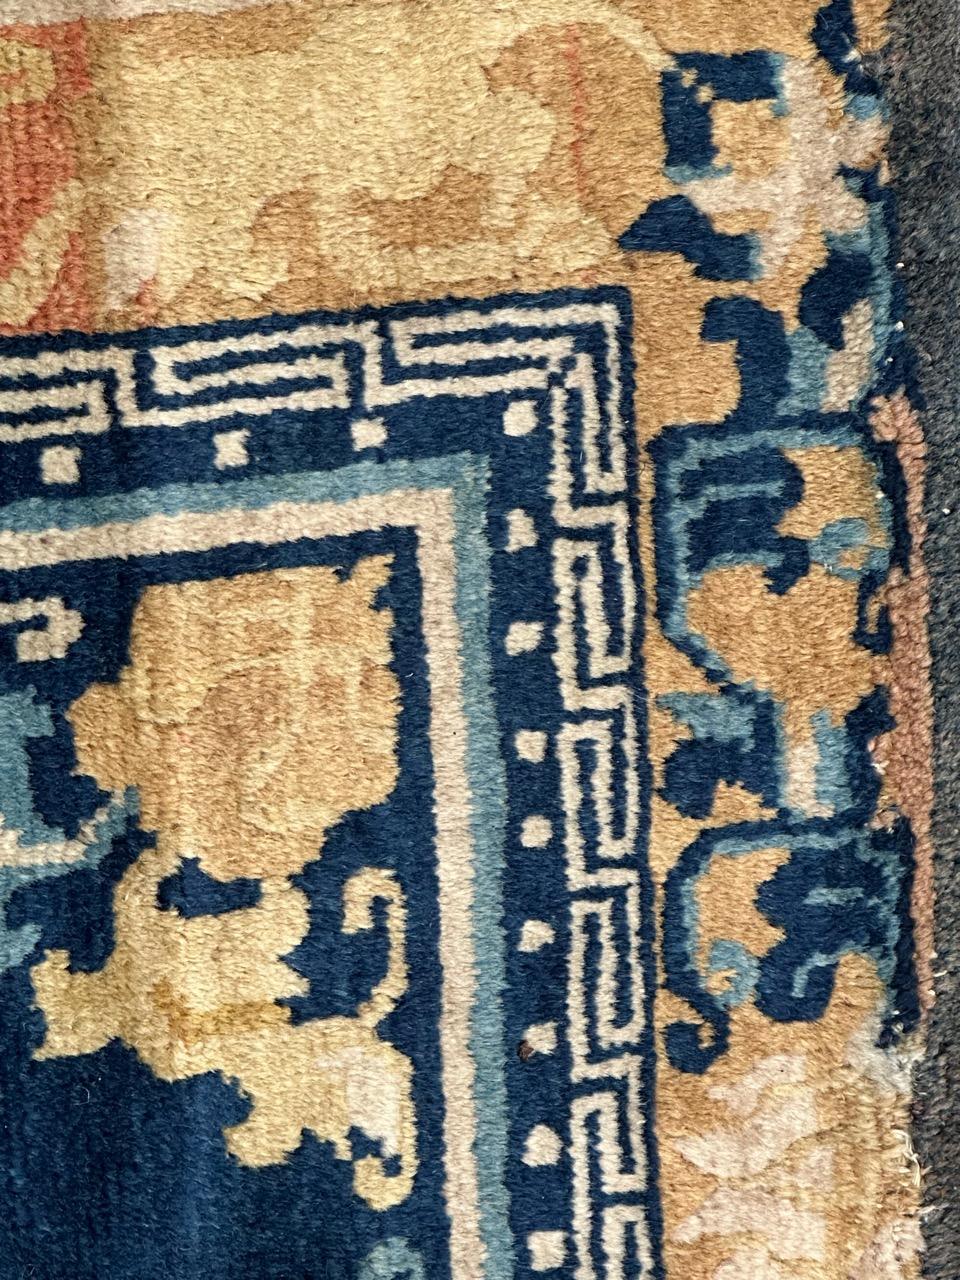 Wool Bobyrug’s pretty rare antique Chinese rug For Sale